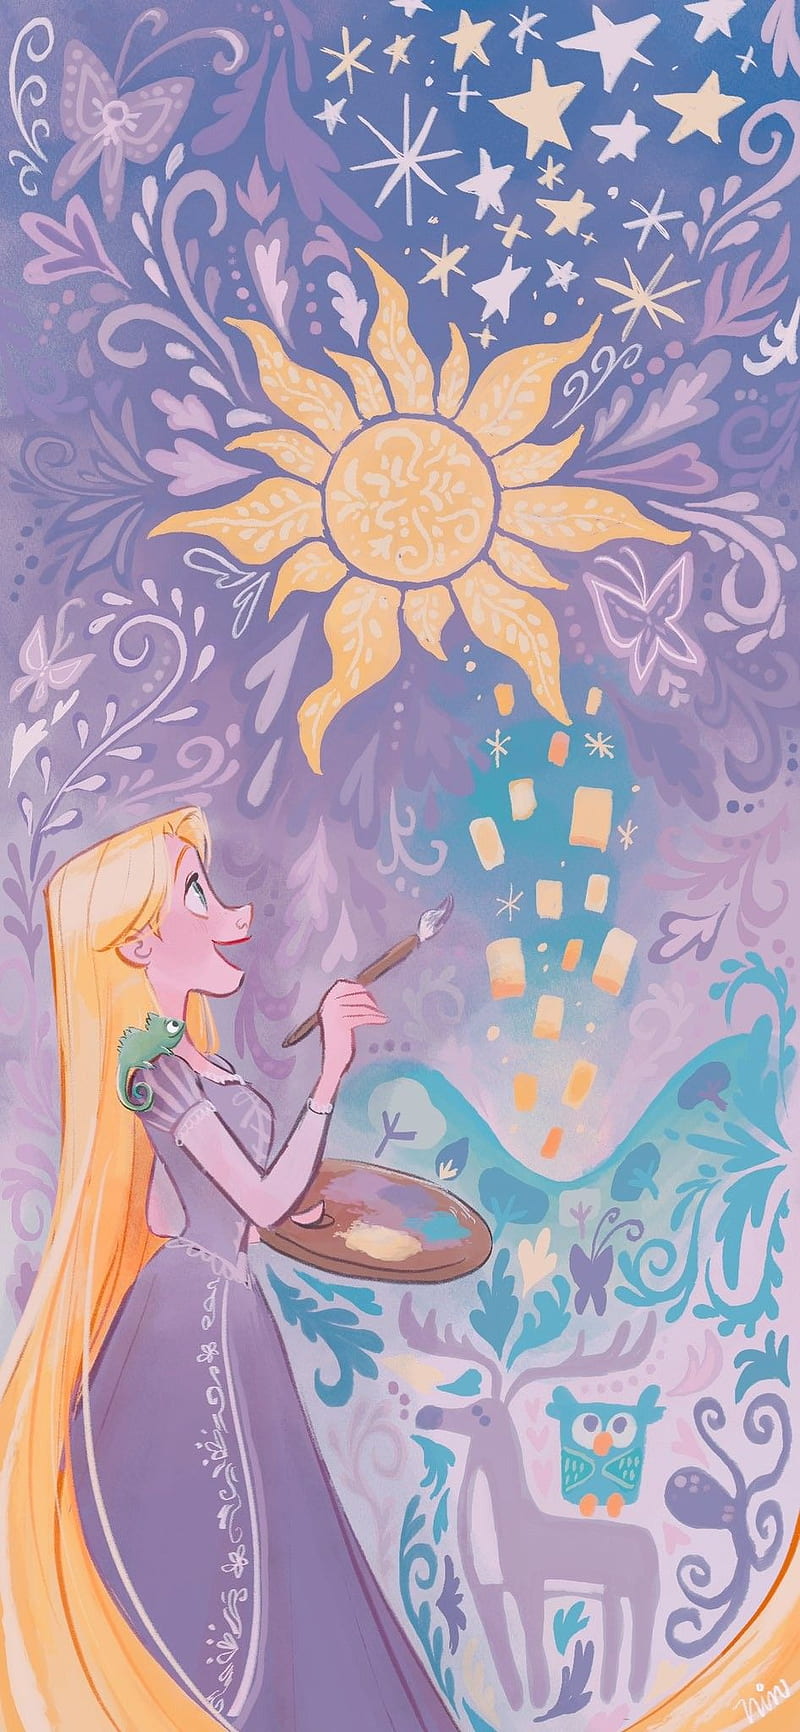 A girl is painting the sky with stars - Rapunzel